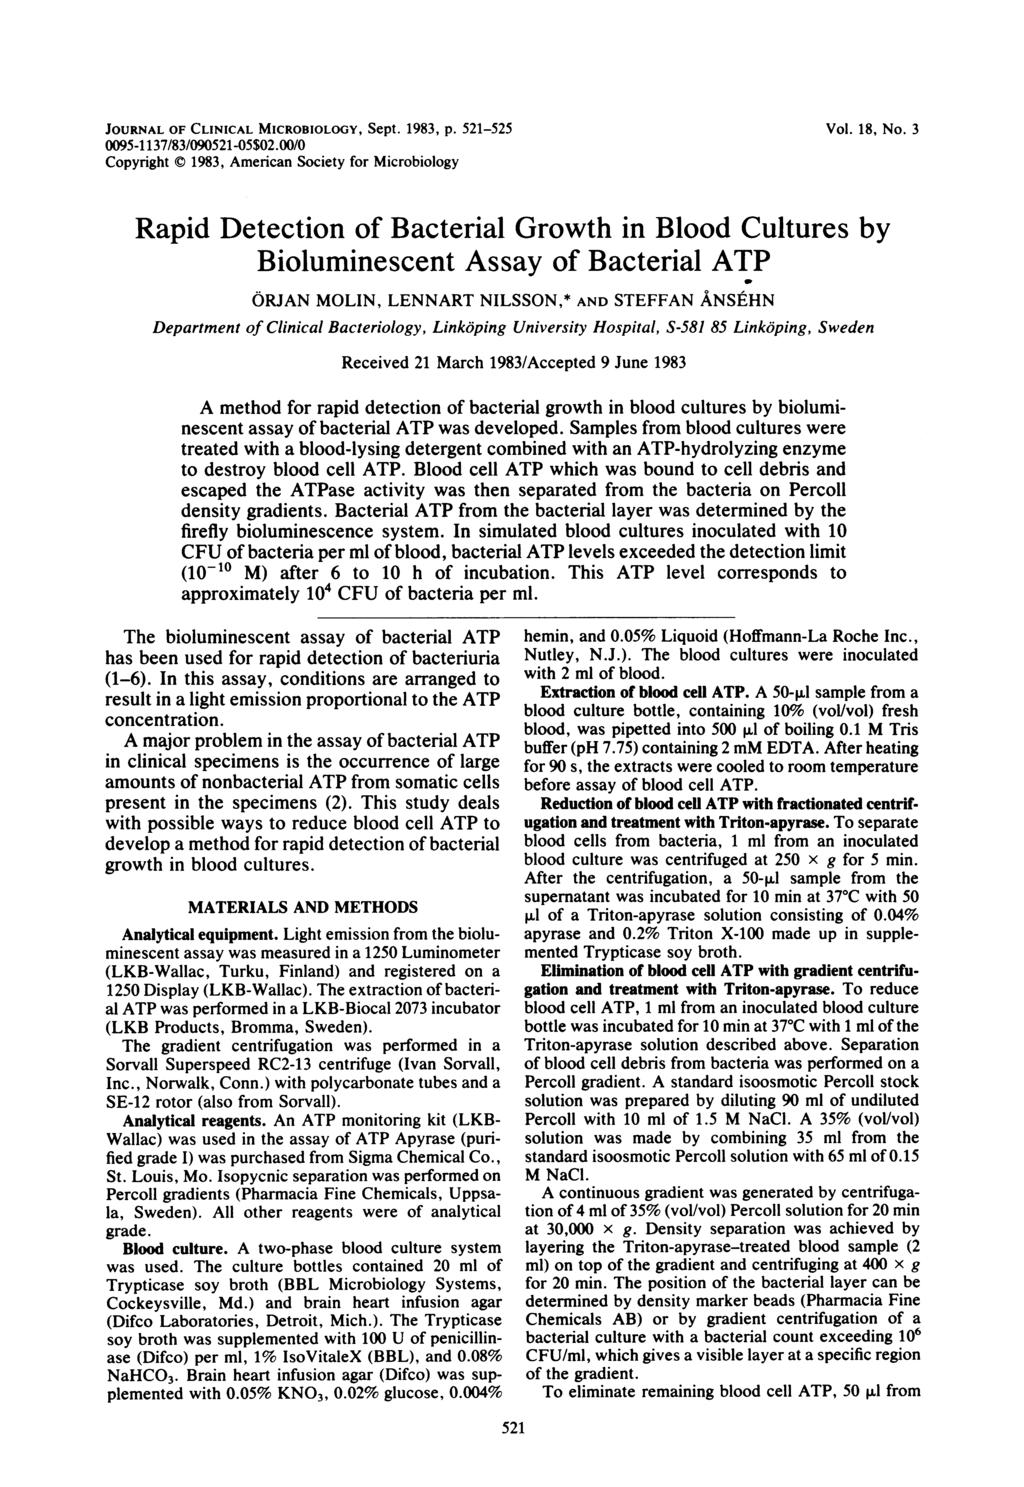 JOURNAL OF CLINICAL MICROBIOLOGY, Sept. 1983, p. 521-525 0095-1137/83/090521-05$02.00/O Copyright C 1983, American Society for Microbiology Vol. 18, No.